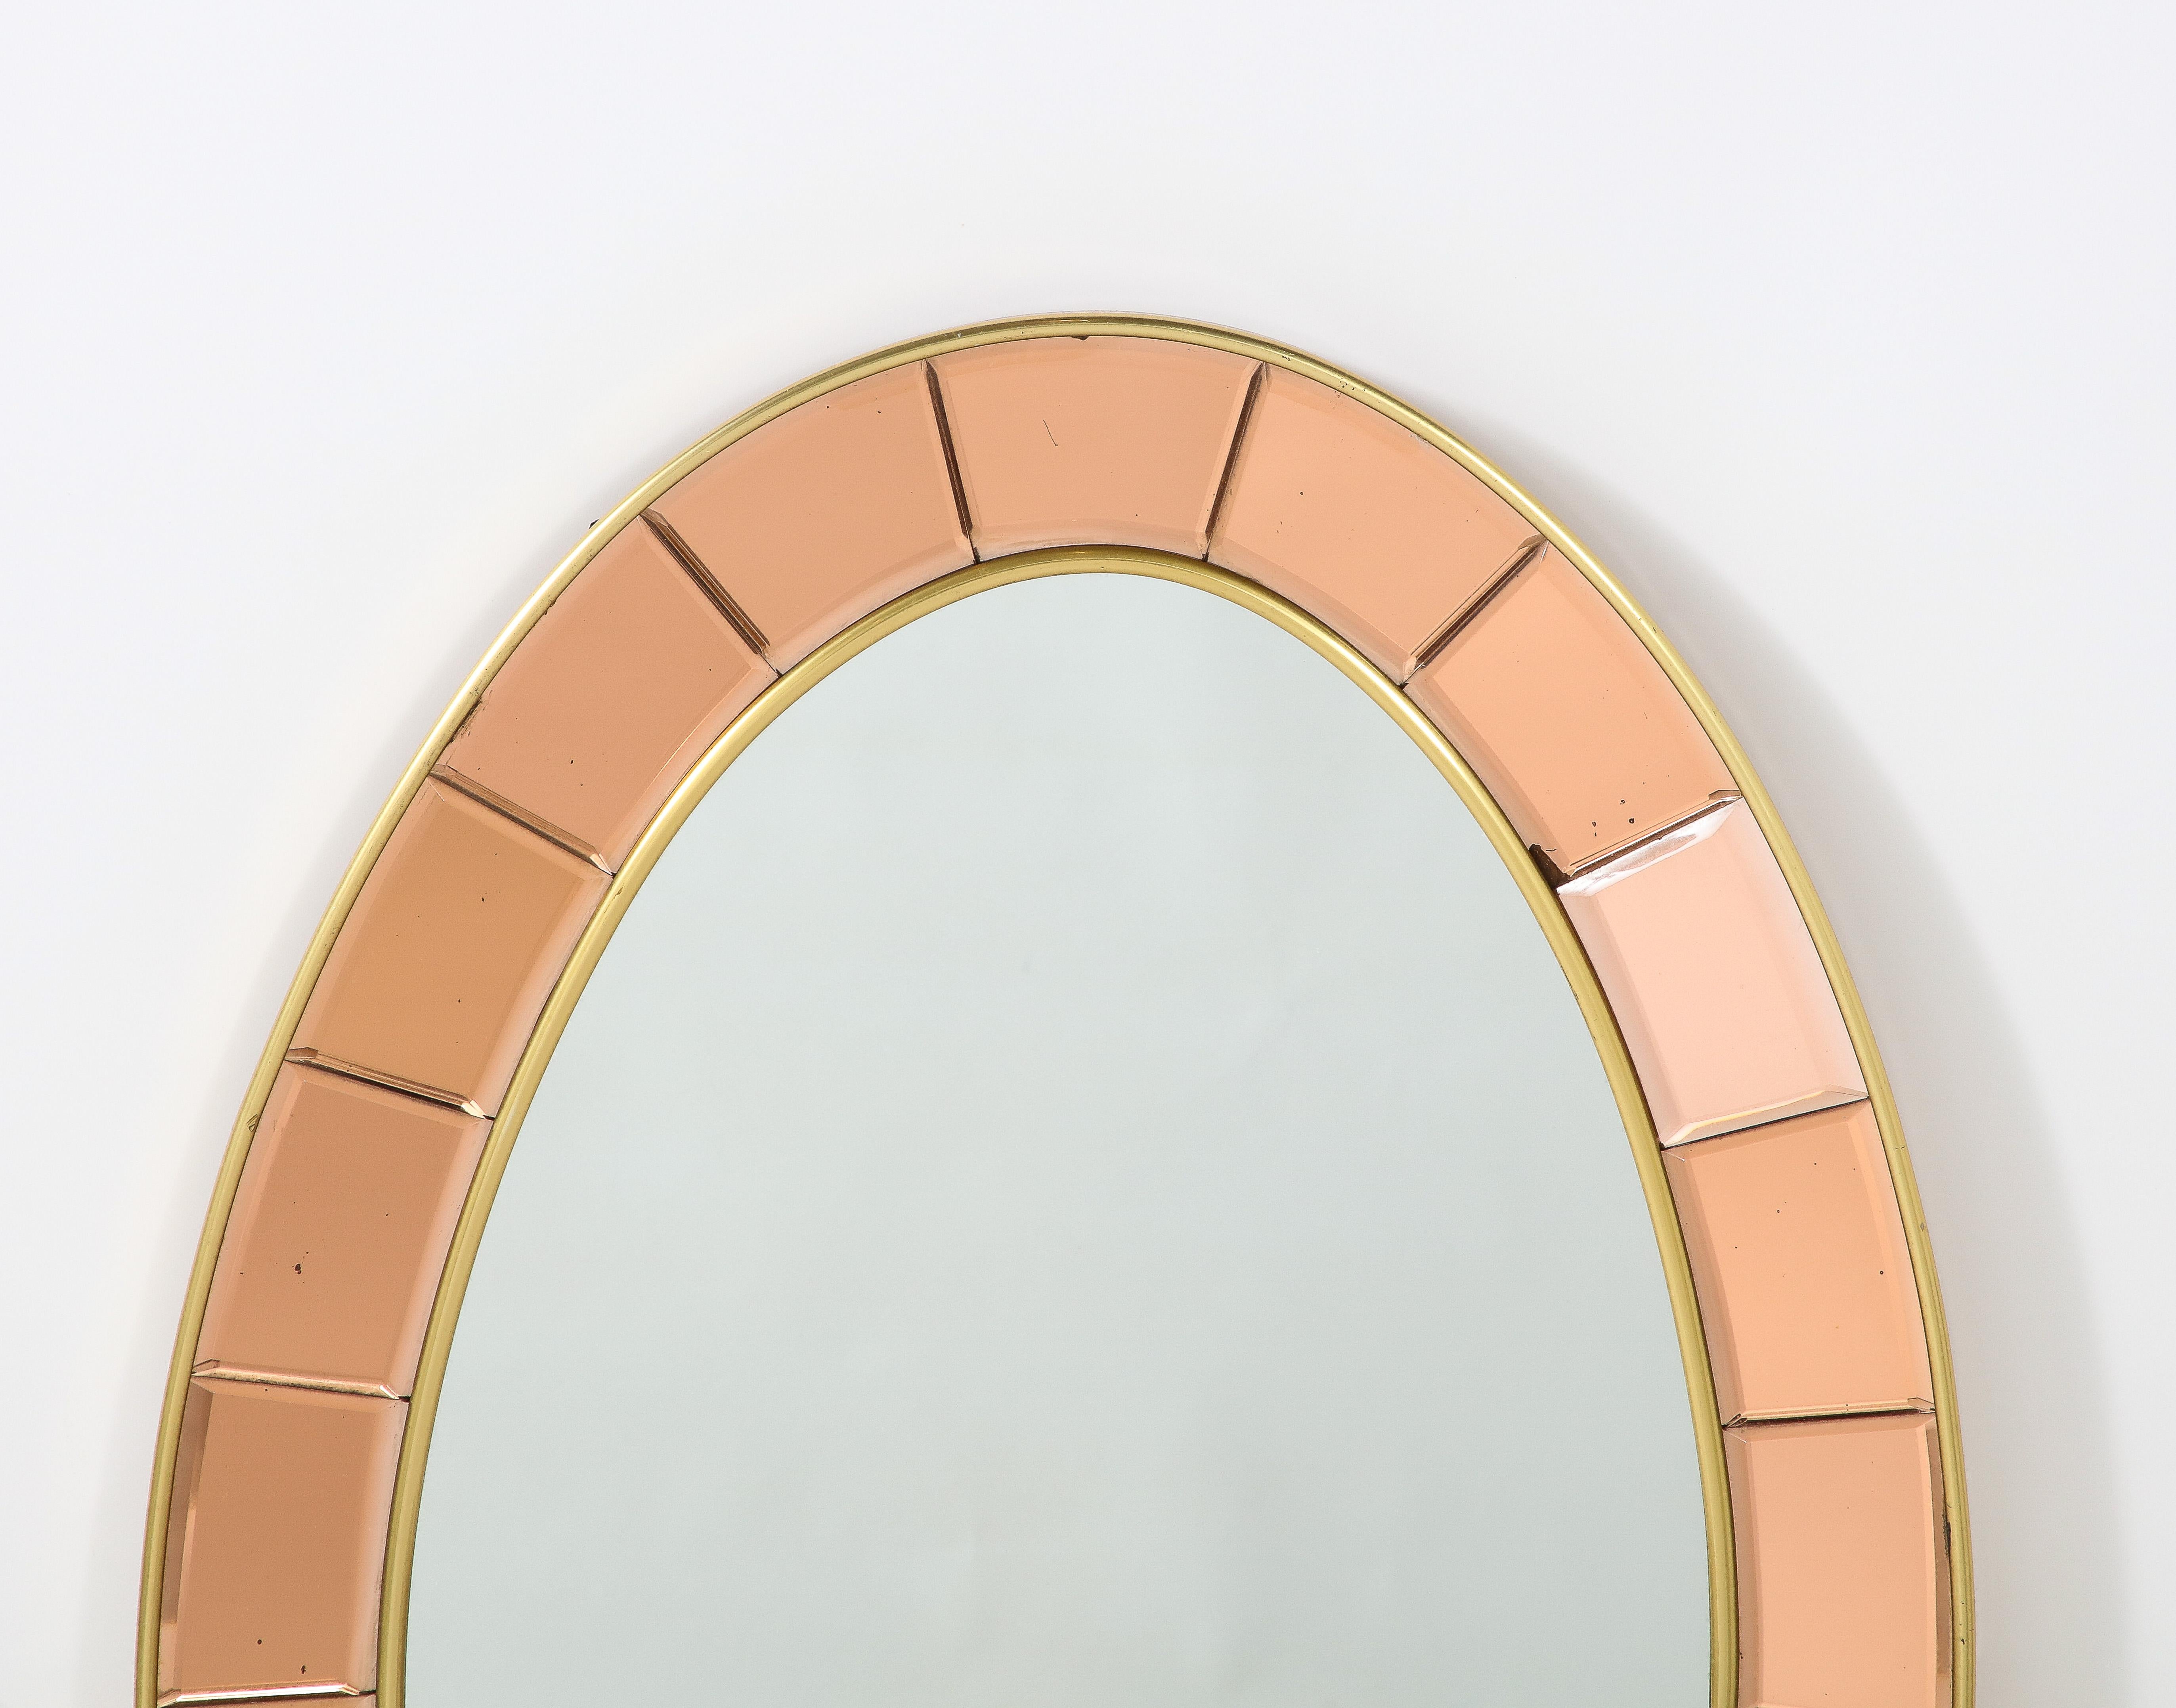 An exquisite Cristal Art oval mirror, the border defined with segmented and beveled hand-cut rose gold crystal glass and the inner oval frame with clear glass. The outer frames rose gold is a beautiful contrast with the warm gilt brass trim,